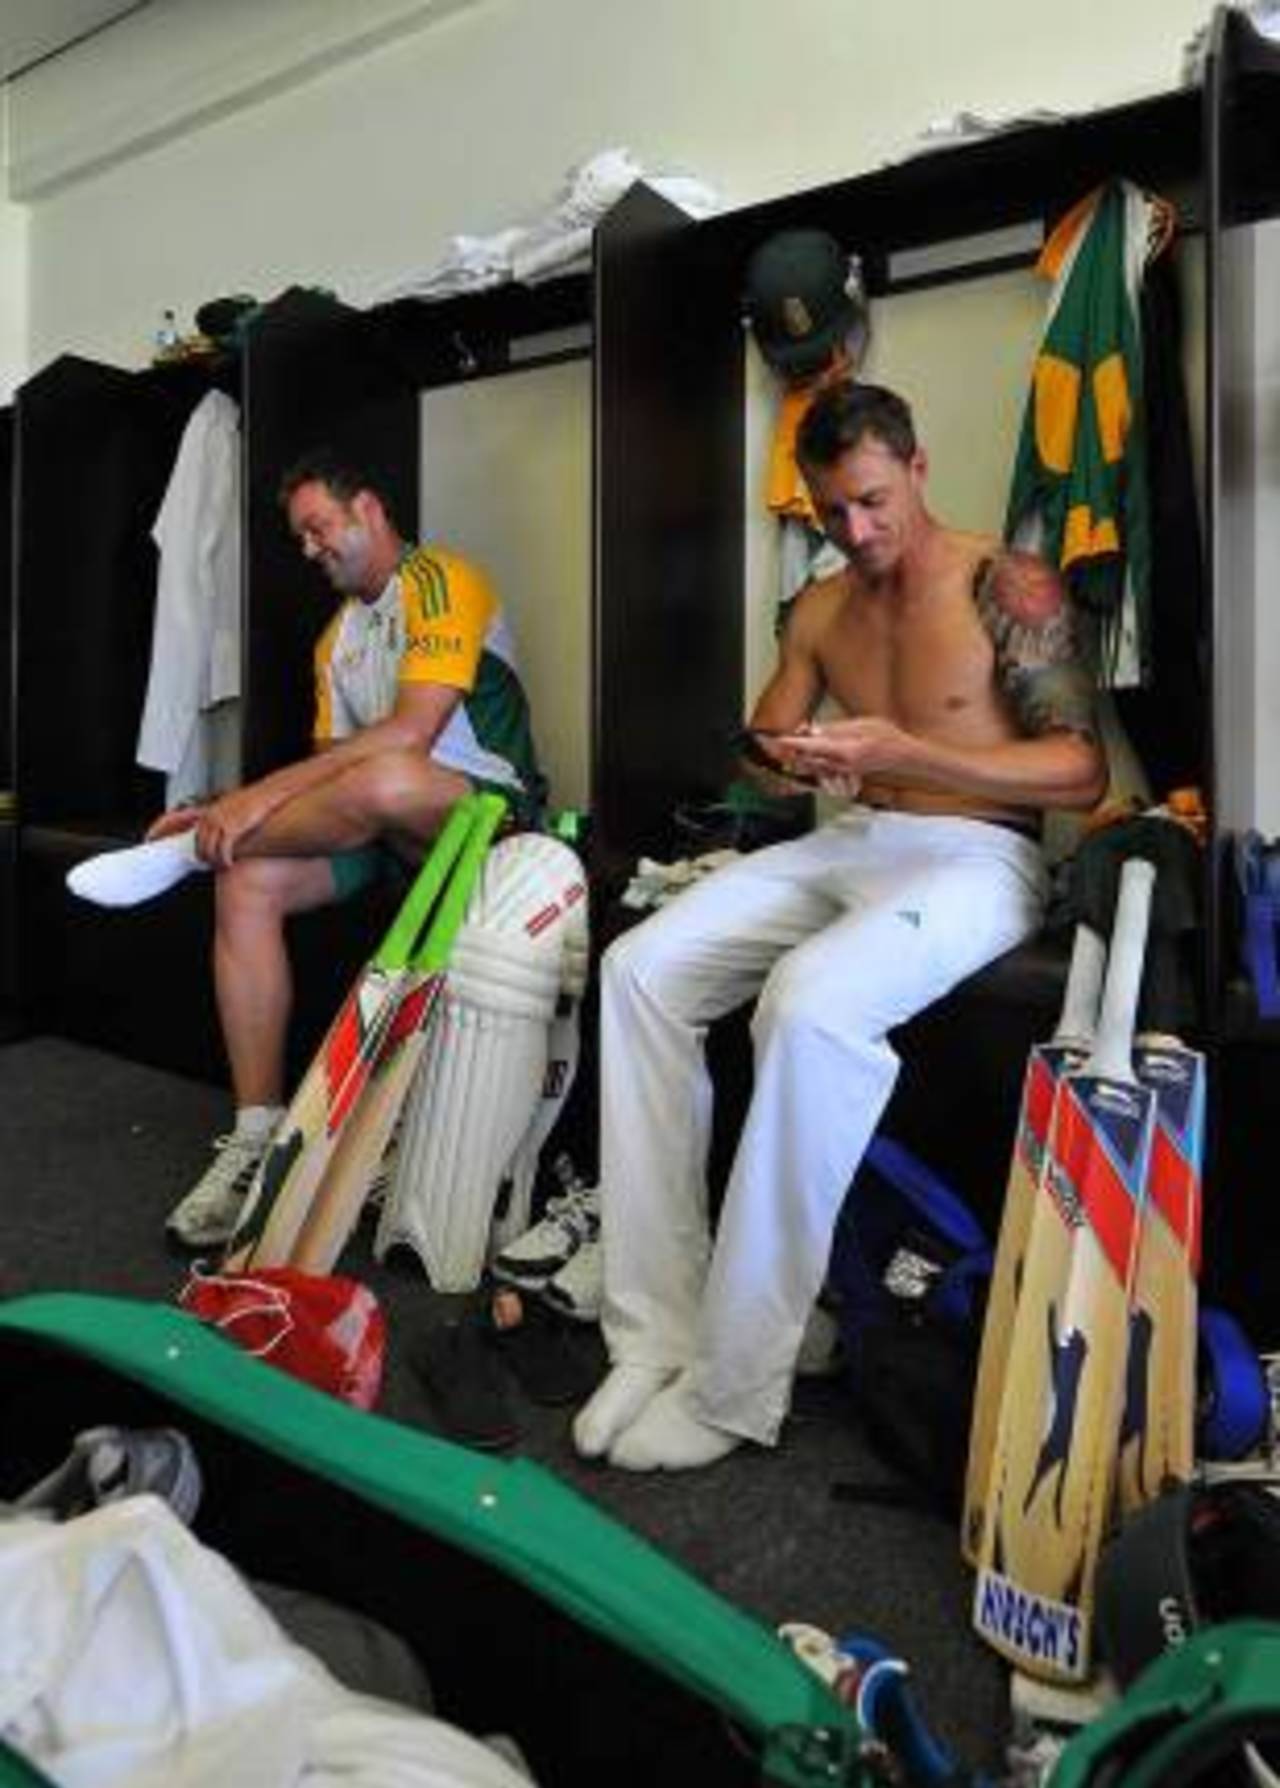 Dale Steyn and Jacques Kallis share a light moment in the dressing room, South Africa v Sri Lanka, 2nd Test, Durban, 4th day, December 29, 2011